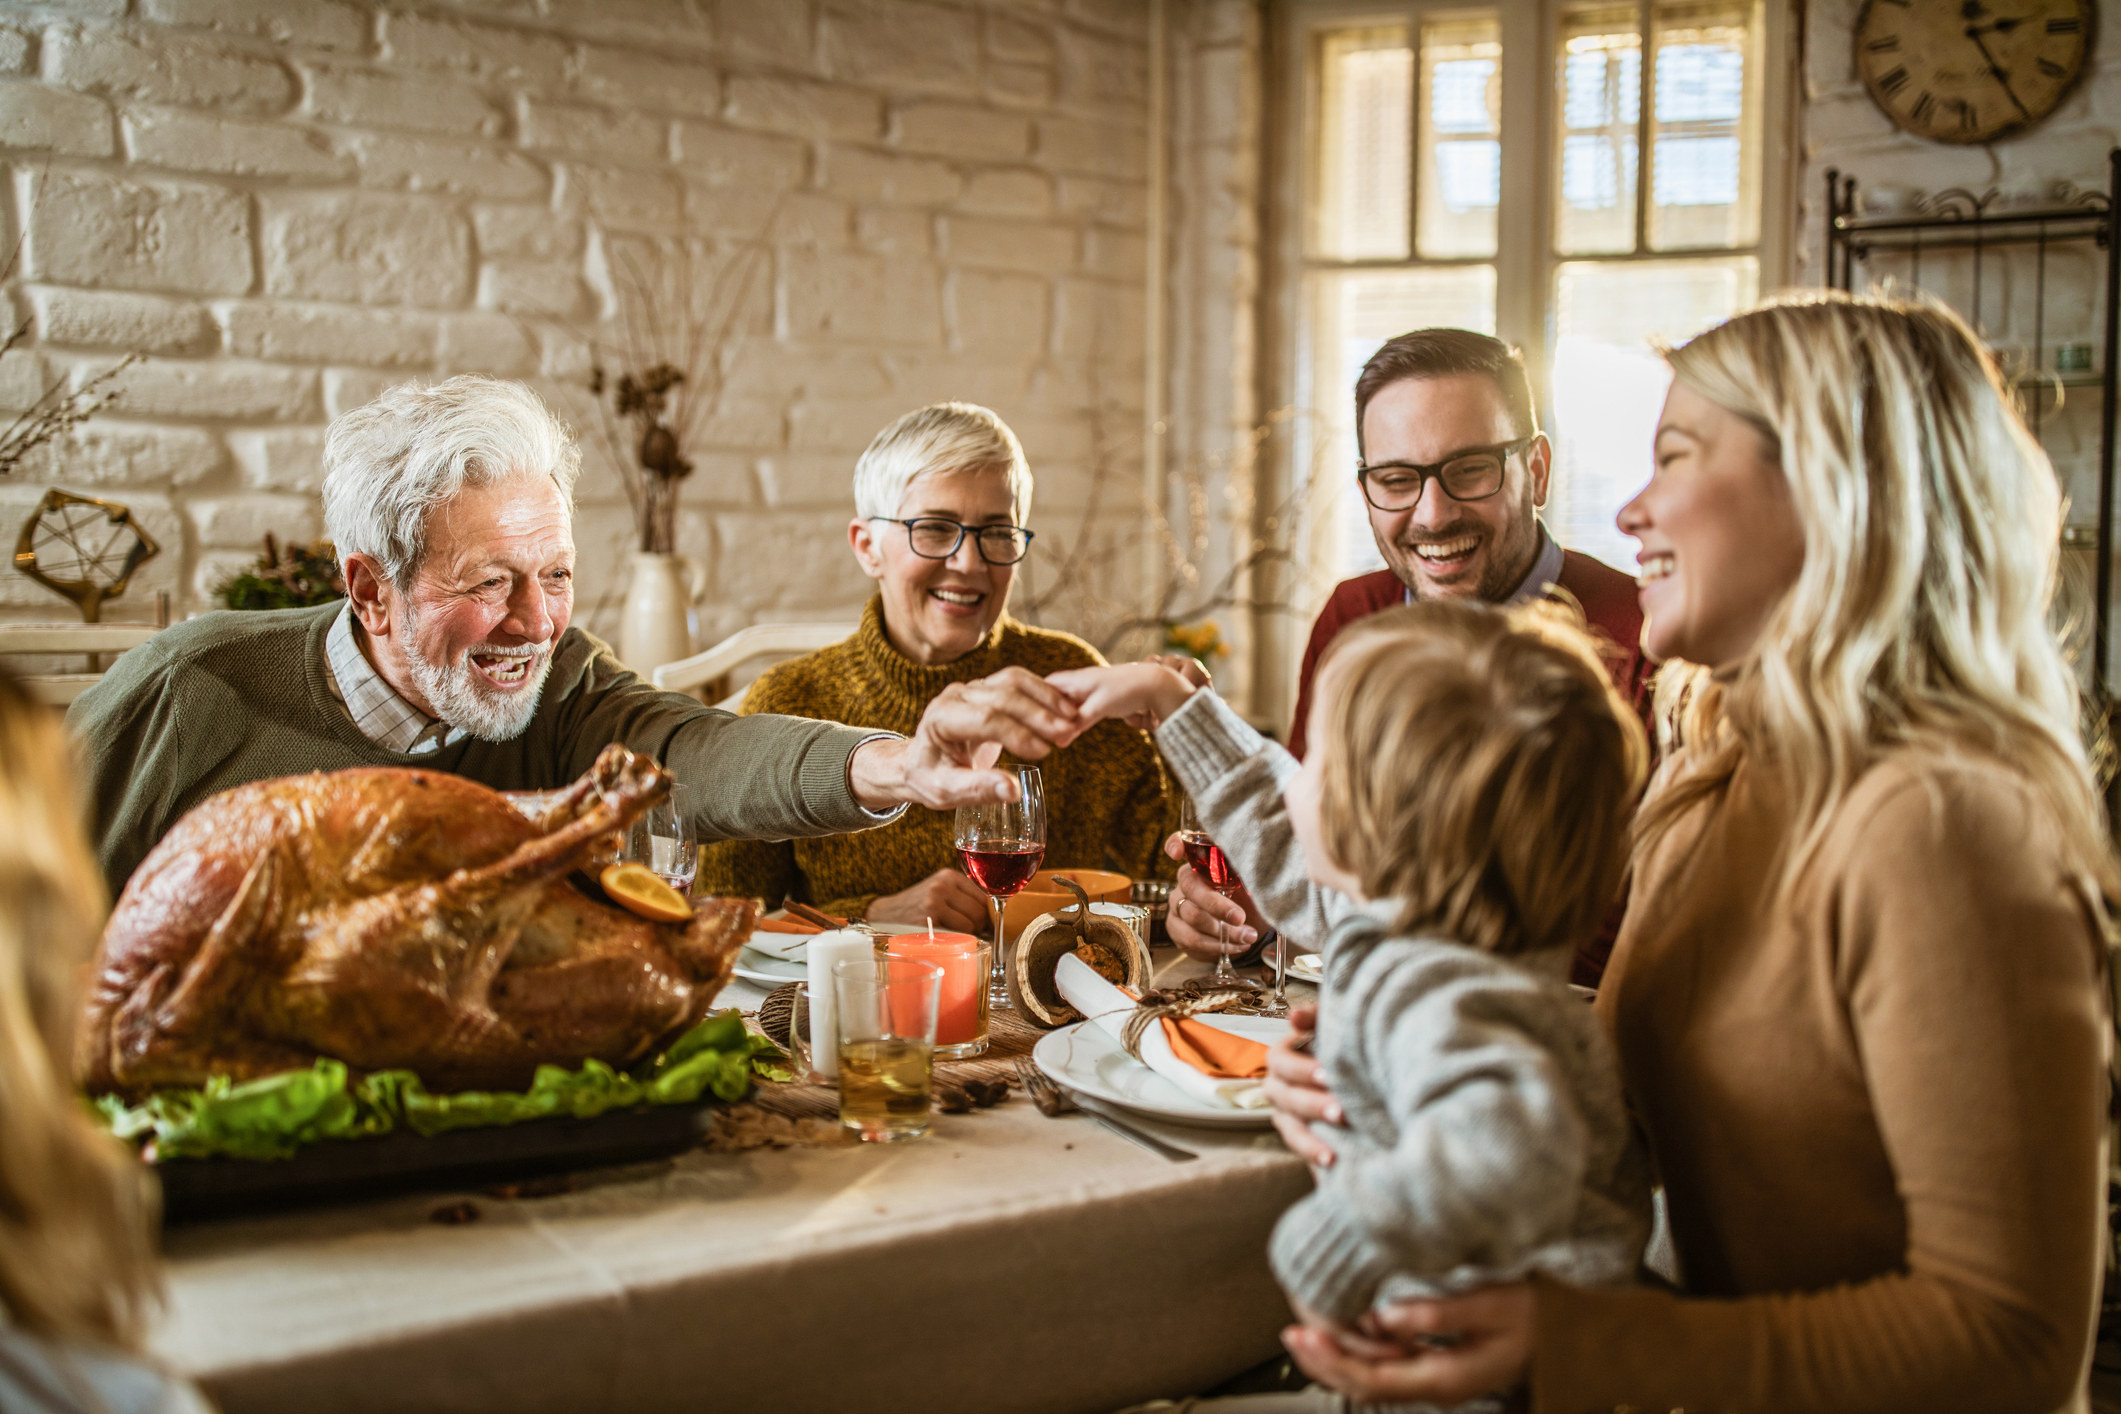 Family members smile and chat over Thanksgiving dinner